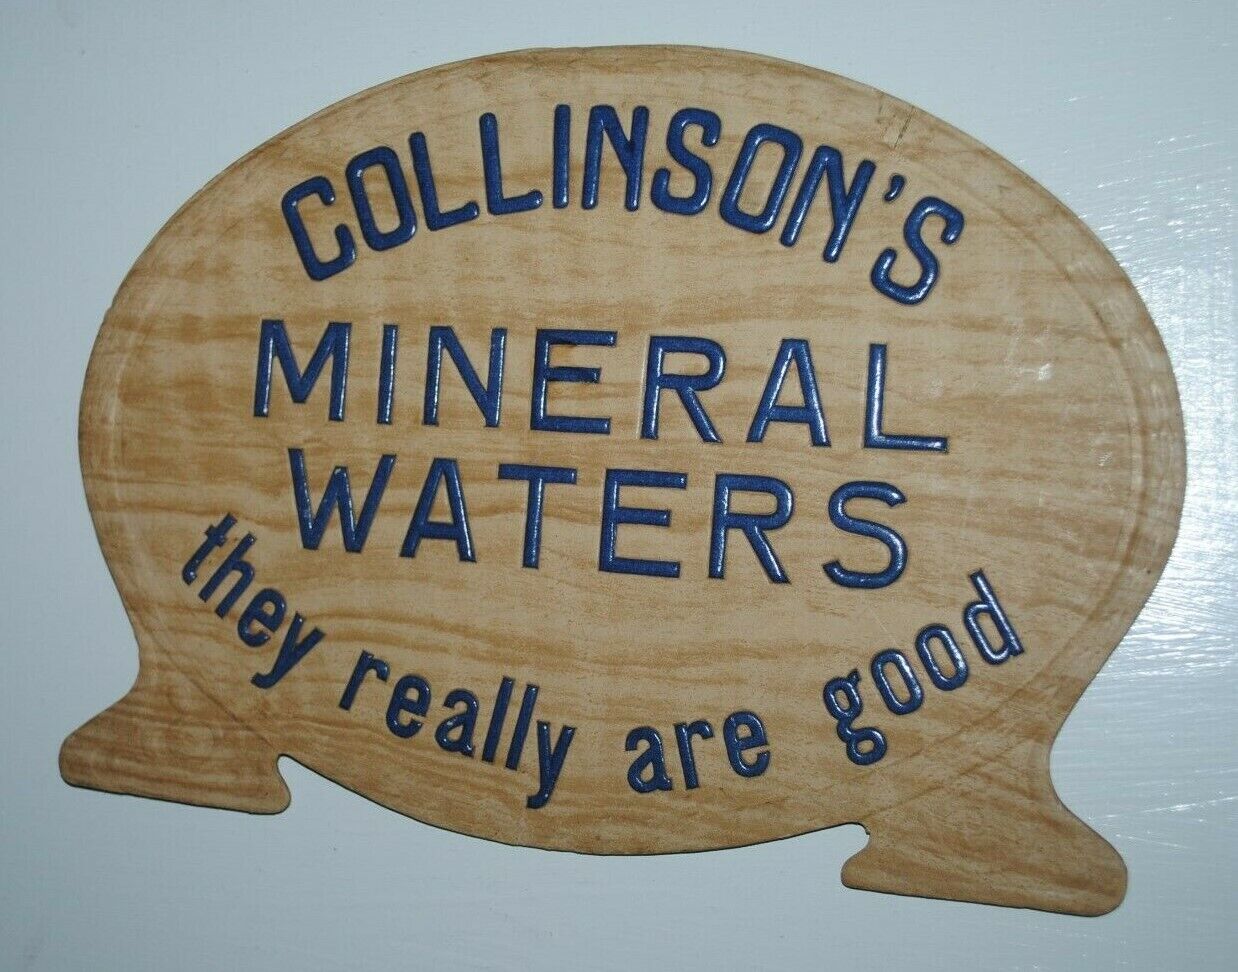 Collinson's Mineral Waters, 1930s-1940s store display sign, England, SCARCE